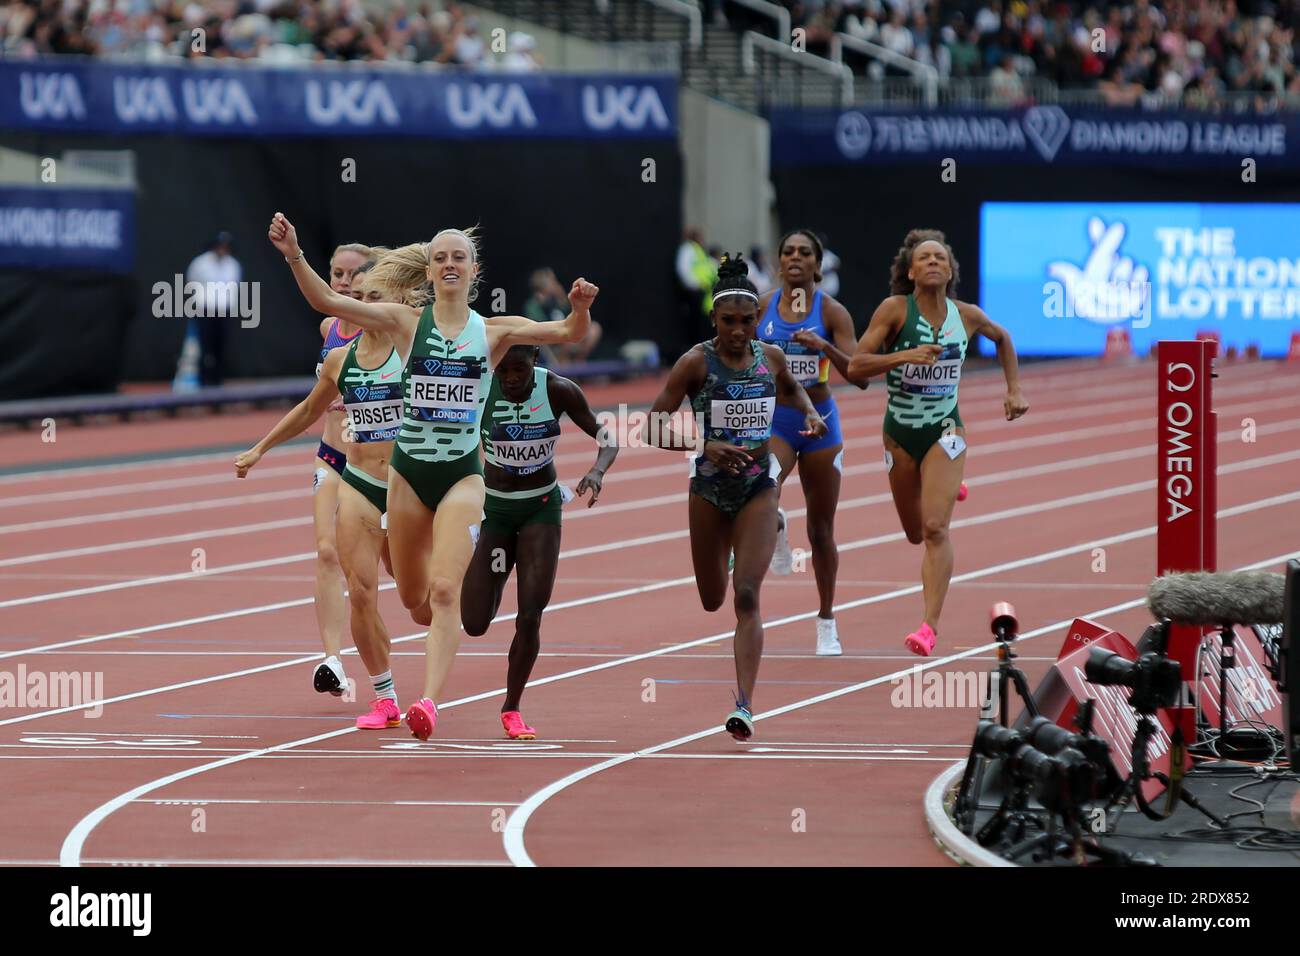 London, UK. 23rd July 23. Jemma REEKIE (Great Britain) crossing the finish line in the Women's 800m Final at the 2023, IAAF Diamond League, Queen Elizabeth Olympic Park, Stratford, London, UK. Credit: Simon Balson/Alamy Live News Stock Photo